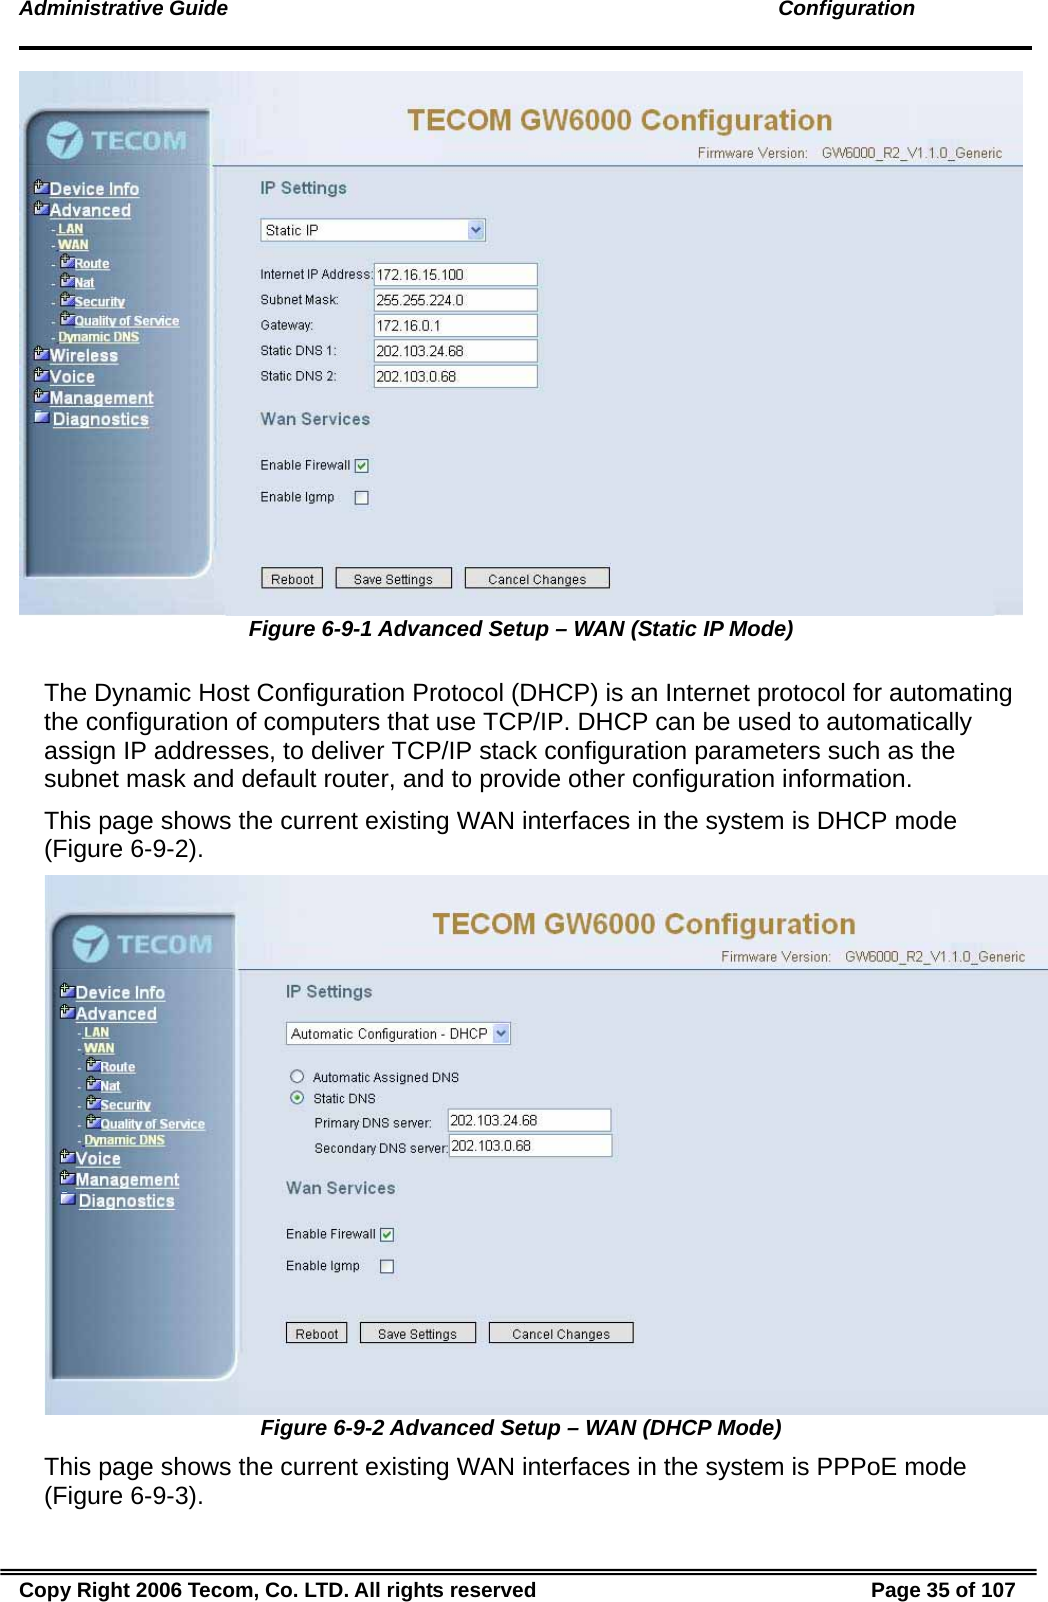 Administrative Guide                                                                                               Configuration  Figure 6-9-1 Advanced Setup – WAN (Static IP Mode)  The Dynamic Host Configuration Protocol (DHCP) is an Internet protocol for automating the configuration of computers that use TCP/IP. DHCP can be used to automatically assign IP addresses, to deliver TCP/IP stack configuration parameters such as the subnet mask and default router, and to provide other configuration information. This page shows the current existing WAN interfaces in the system is DHCP mode (Figure 6-9-2).  Figure 6-9-2 Advanced Setup – WAN (DHCP Mode) This page shows the current existing WAN interfaces in the system is PPPoE mode (Figure 6-9-3). Copy Right 2006 Tecom, Co. LTD. All rights reserved  Page 35 of 107 